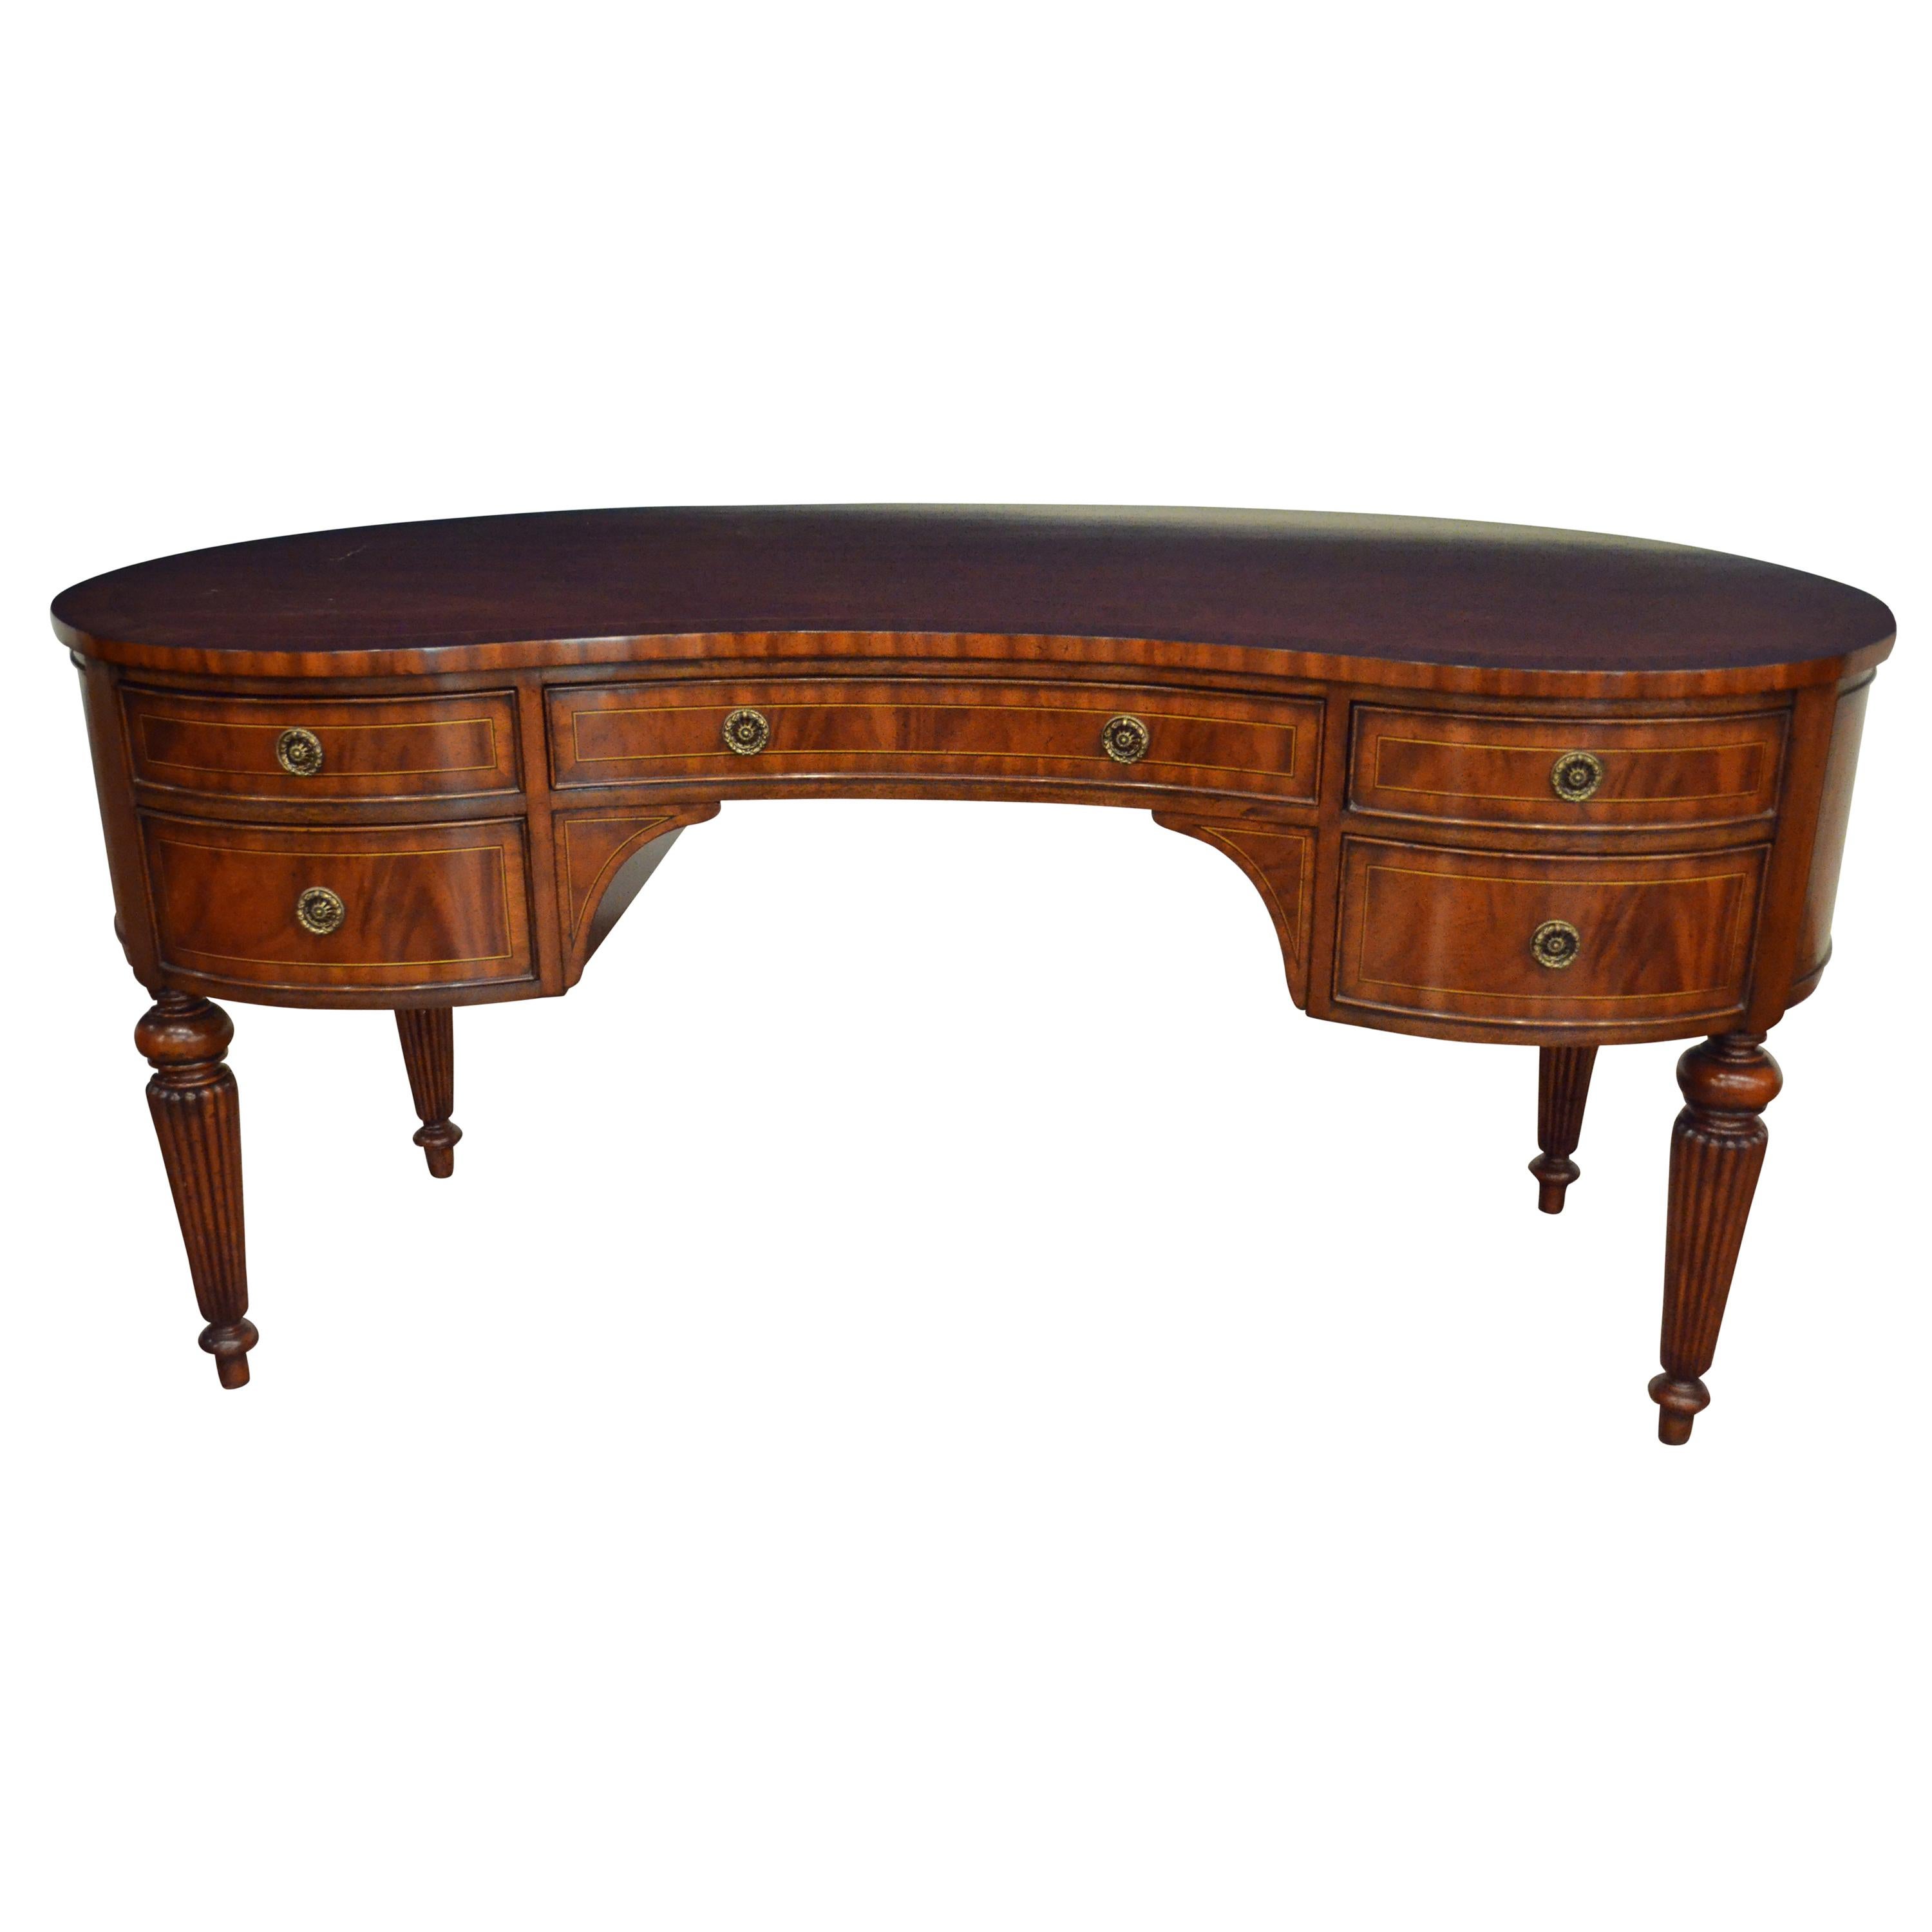 Sheraton Style Kidney Shaped Writing Desk by Leighton Hall